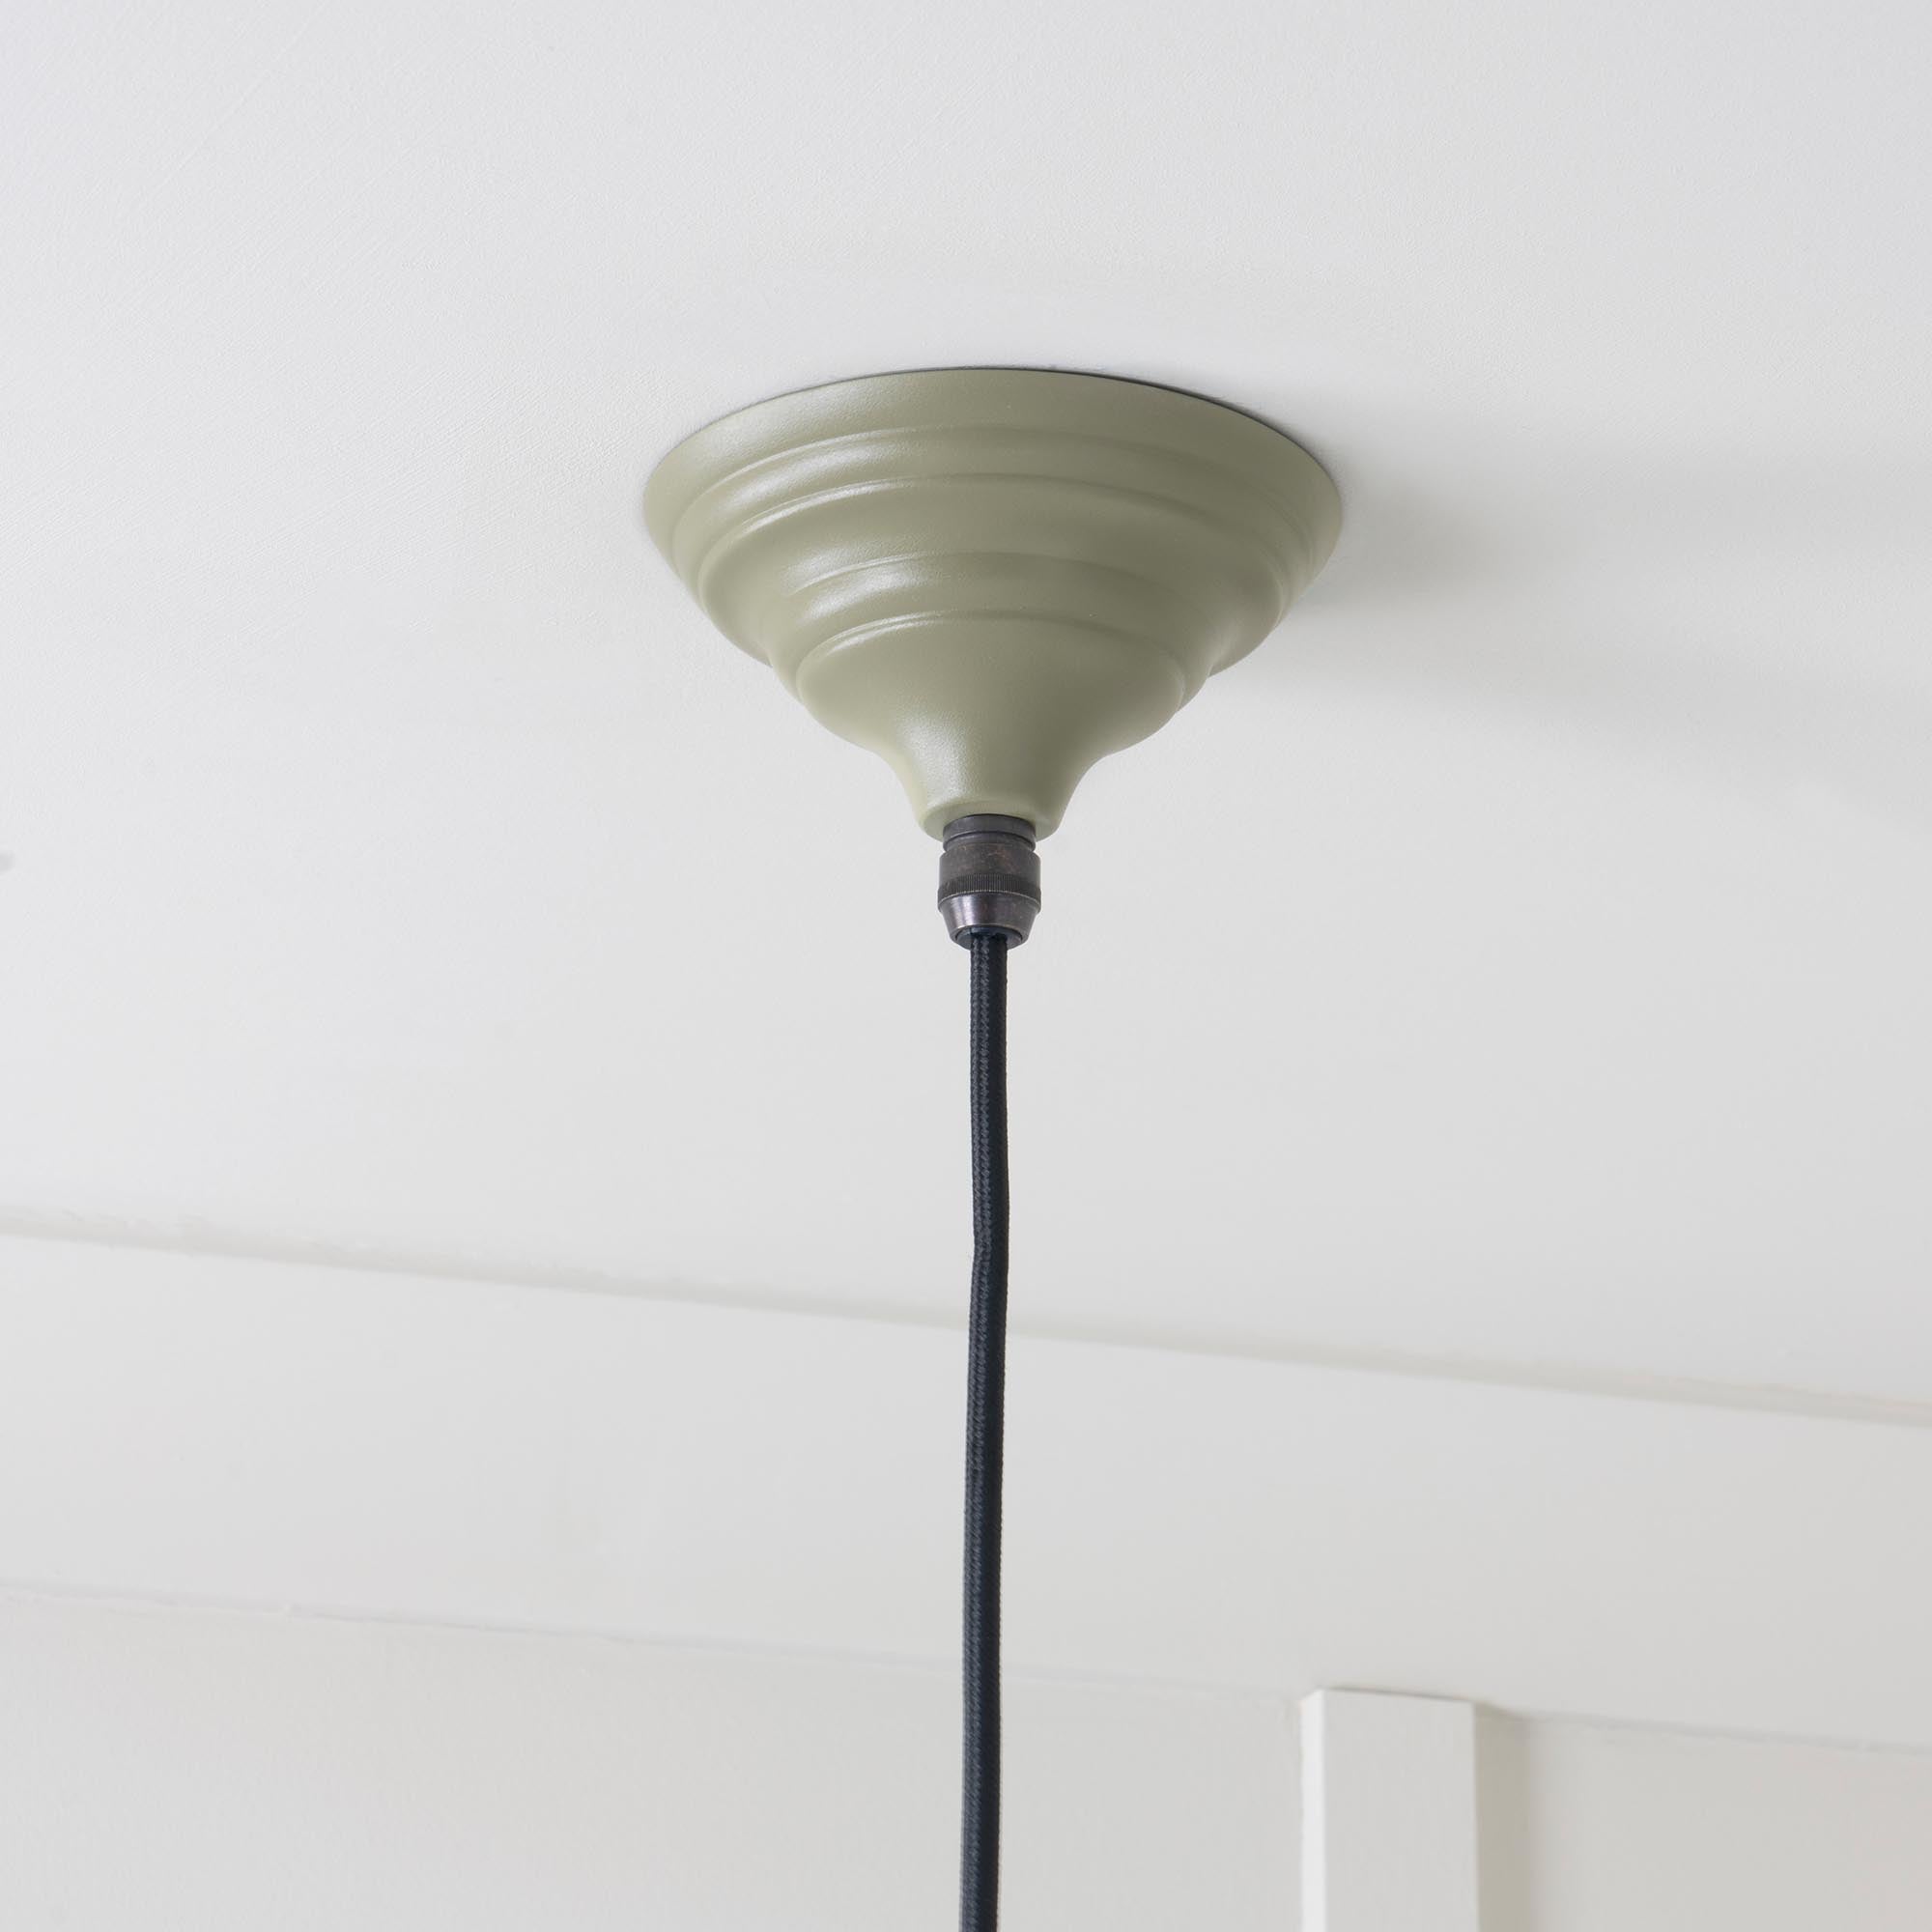 SHOW Close Up Image of Ceiling Rose for Hockley Ceiling Light in Tump